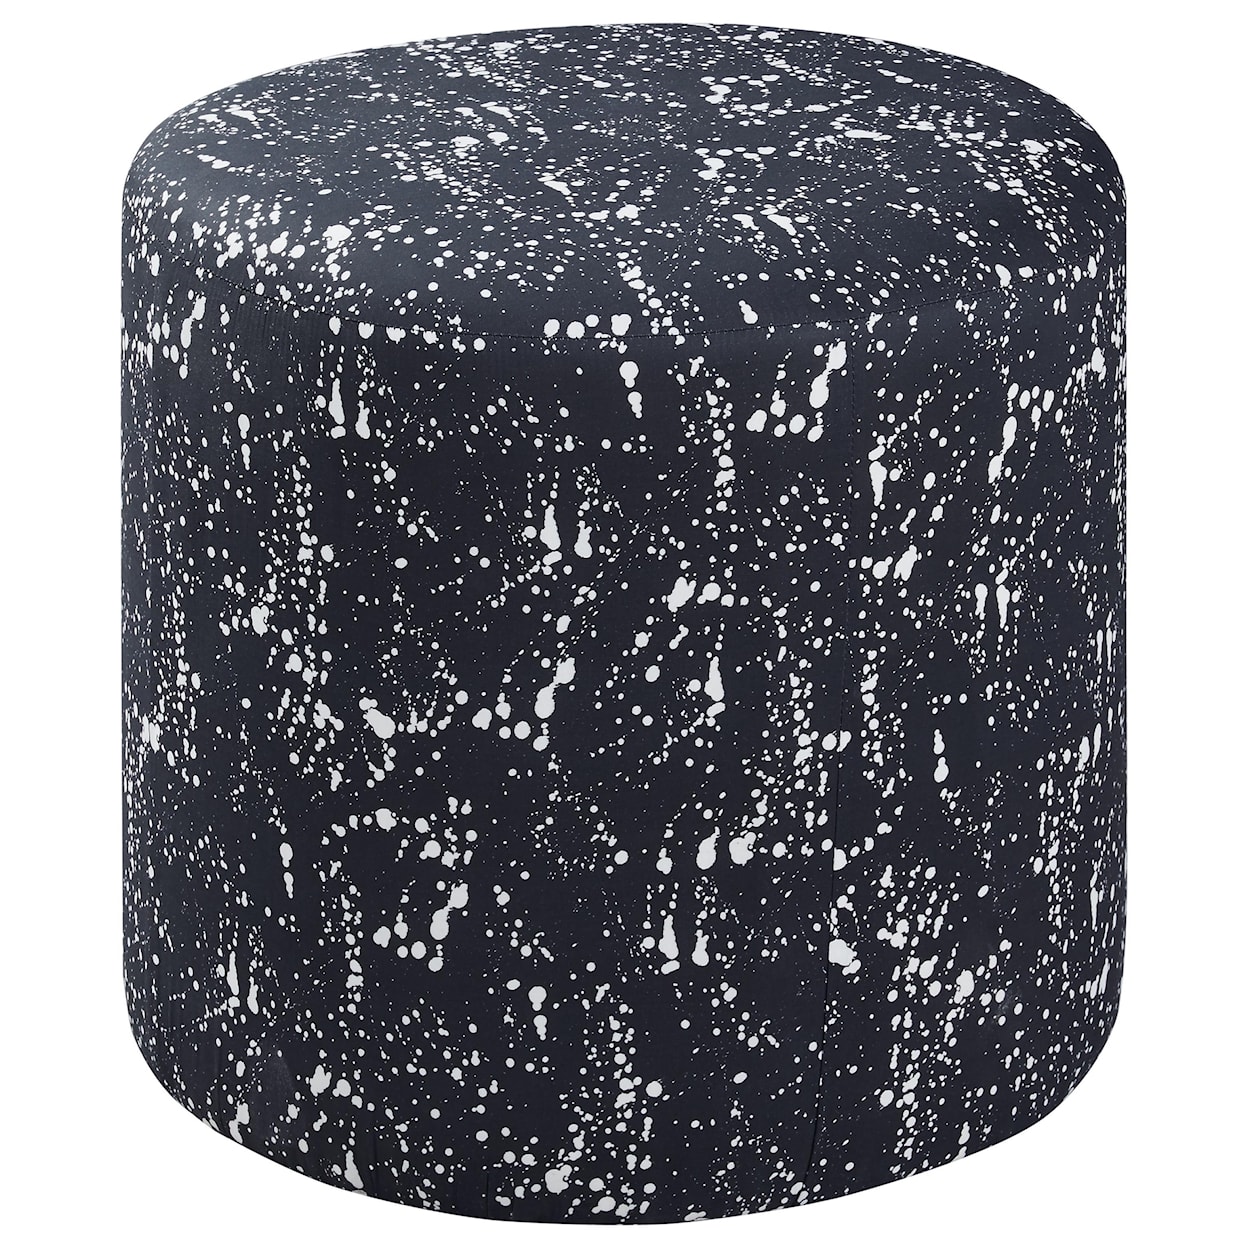 Offshore Furniture Source Accents Round Accent Ottoman